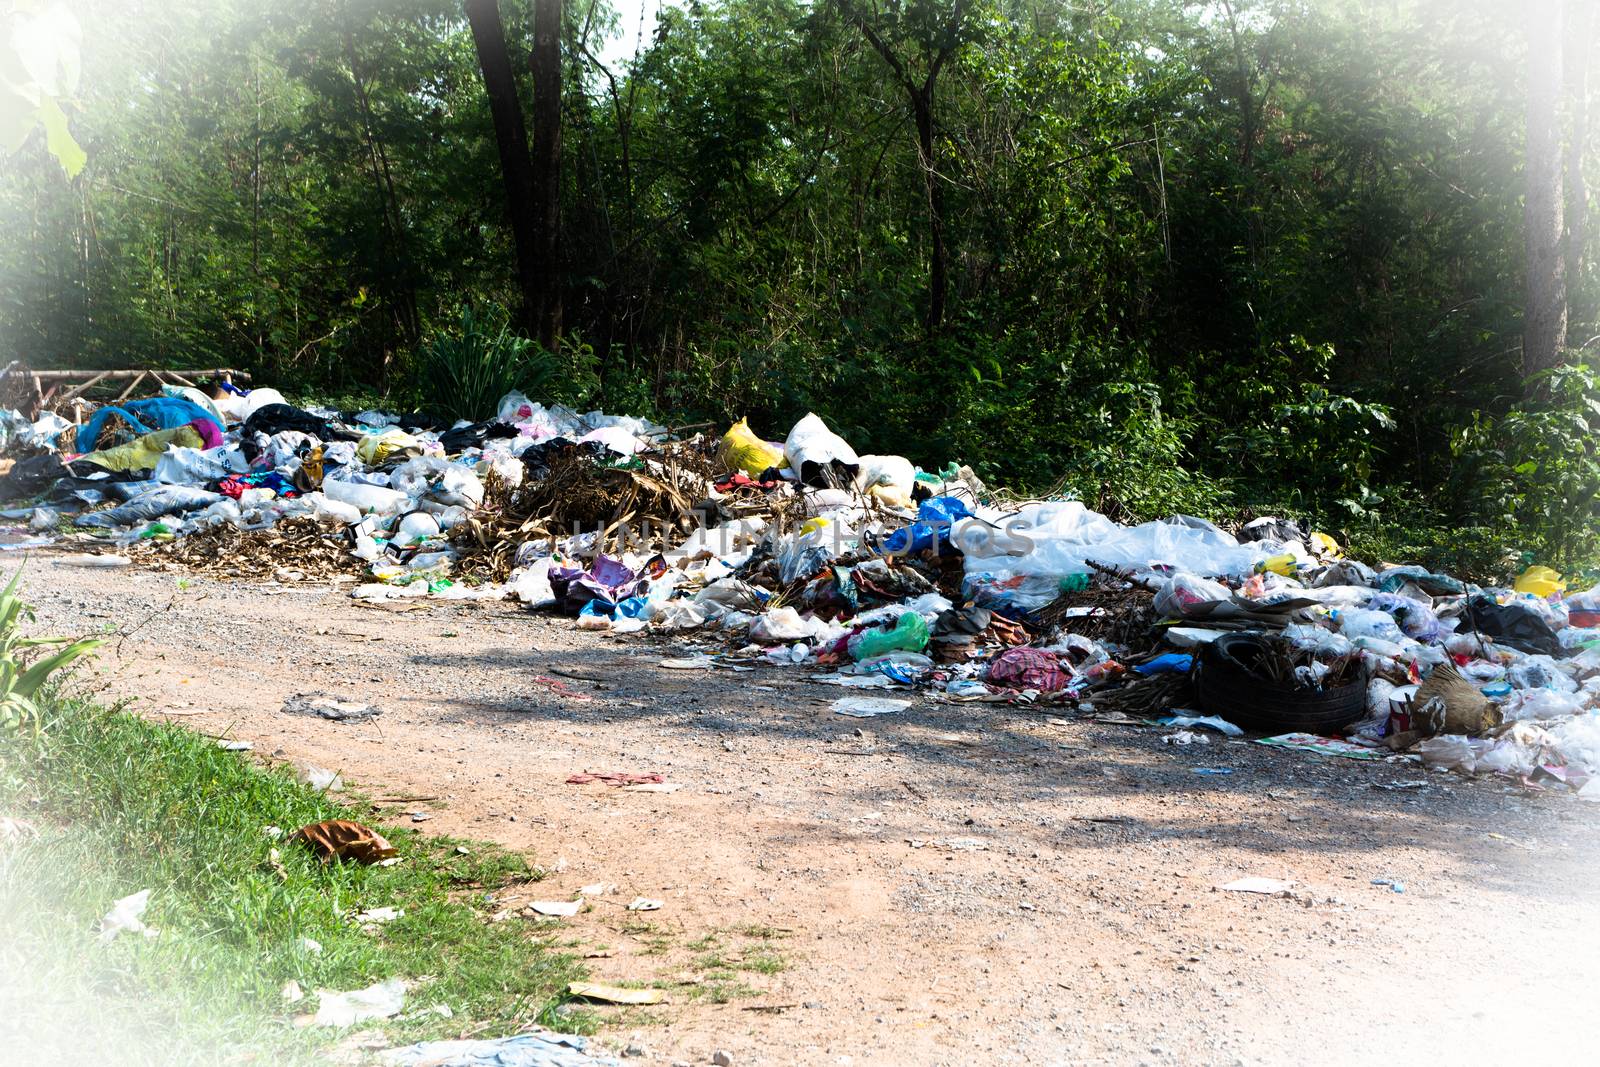 Pile of domestic garbage near the country road on nature background.